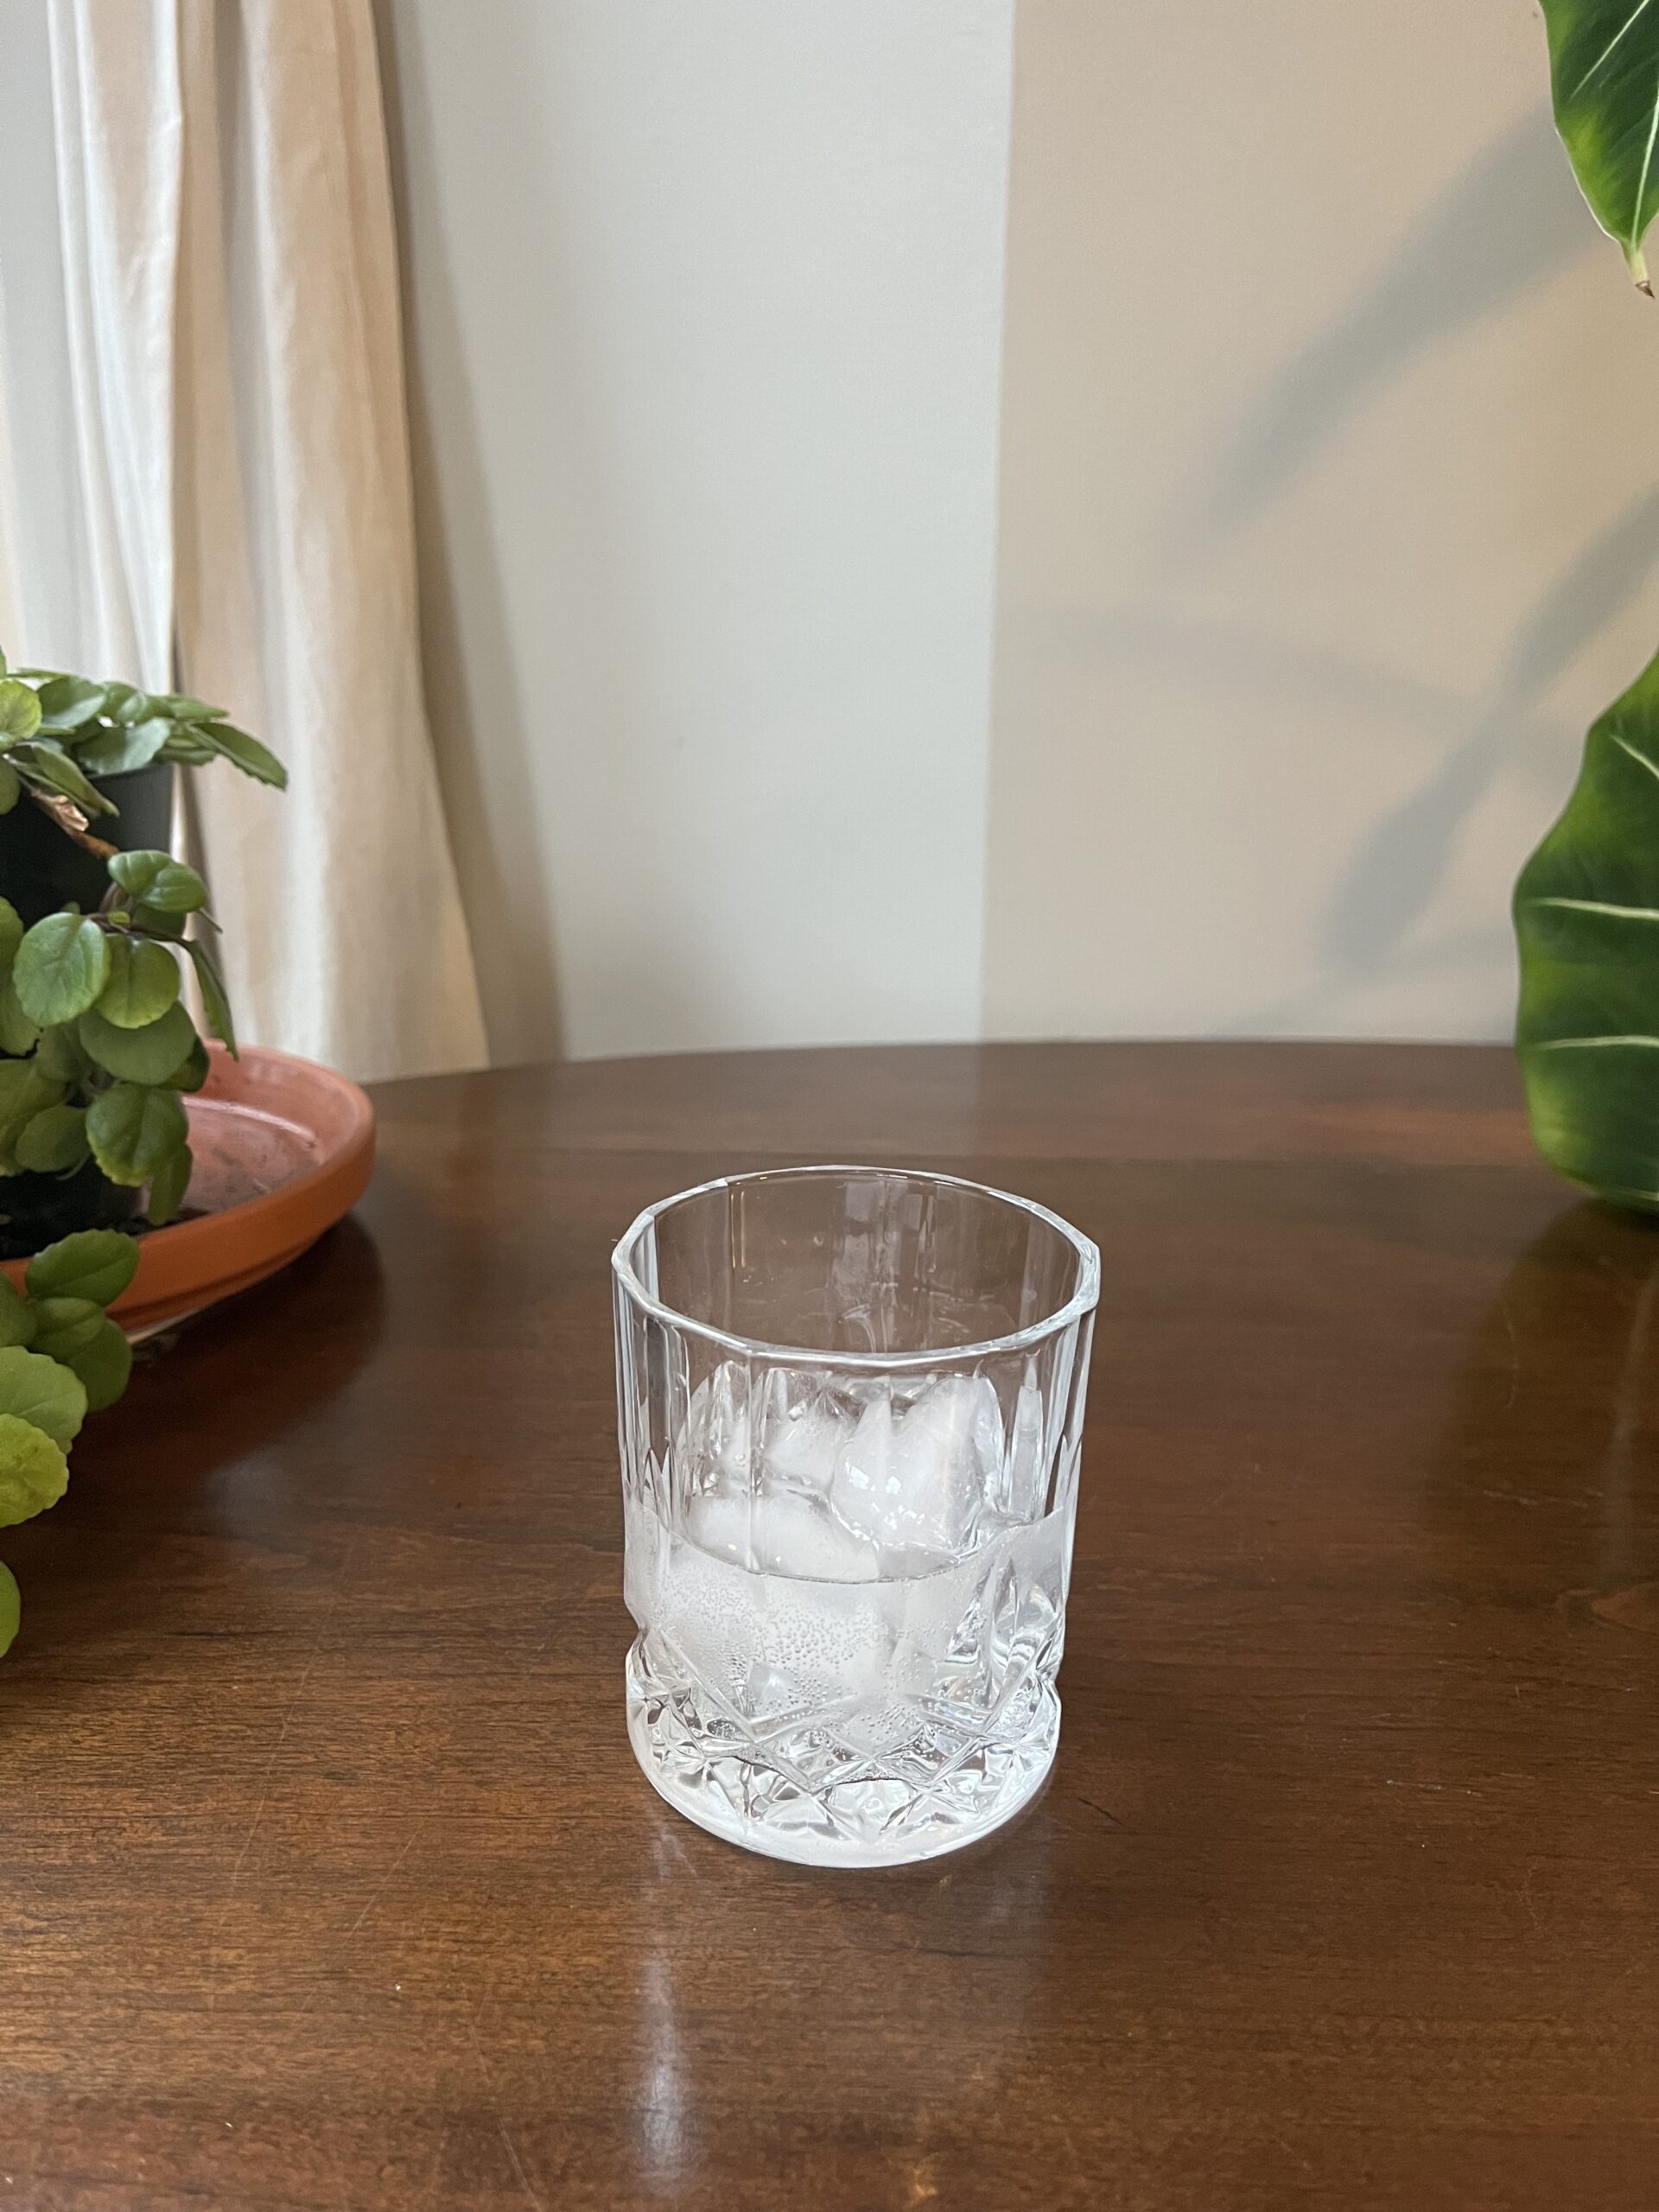 A glass with ice cubes sits on a wooden surface, surrounded by green potted plants.